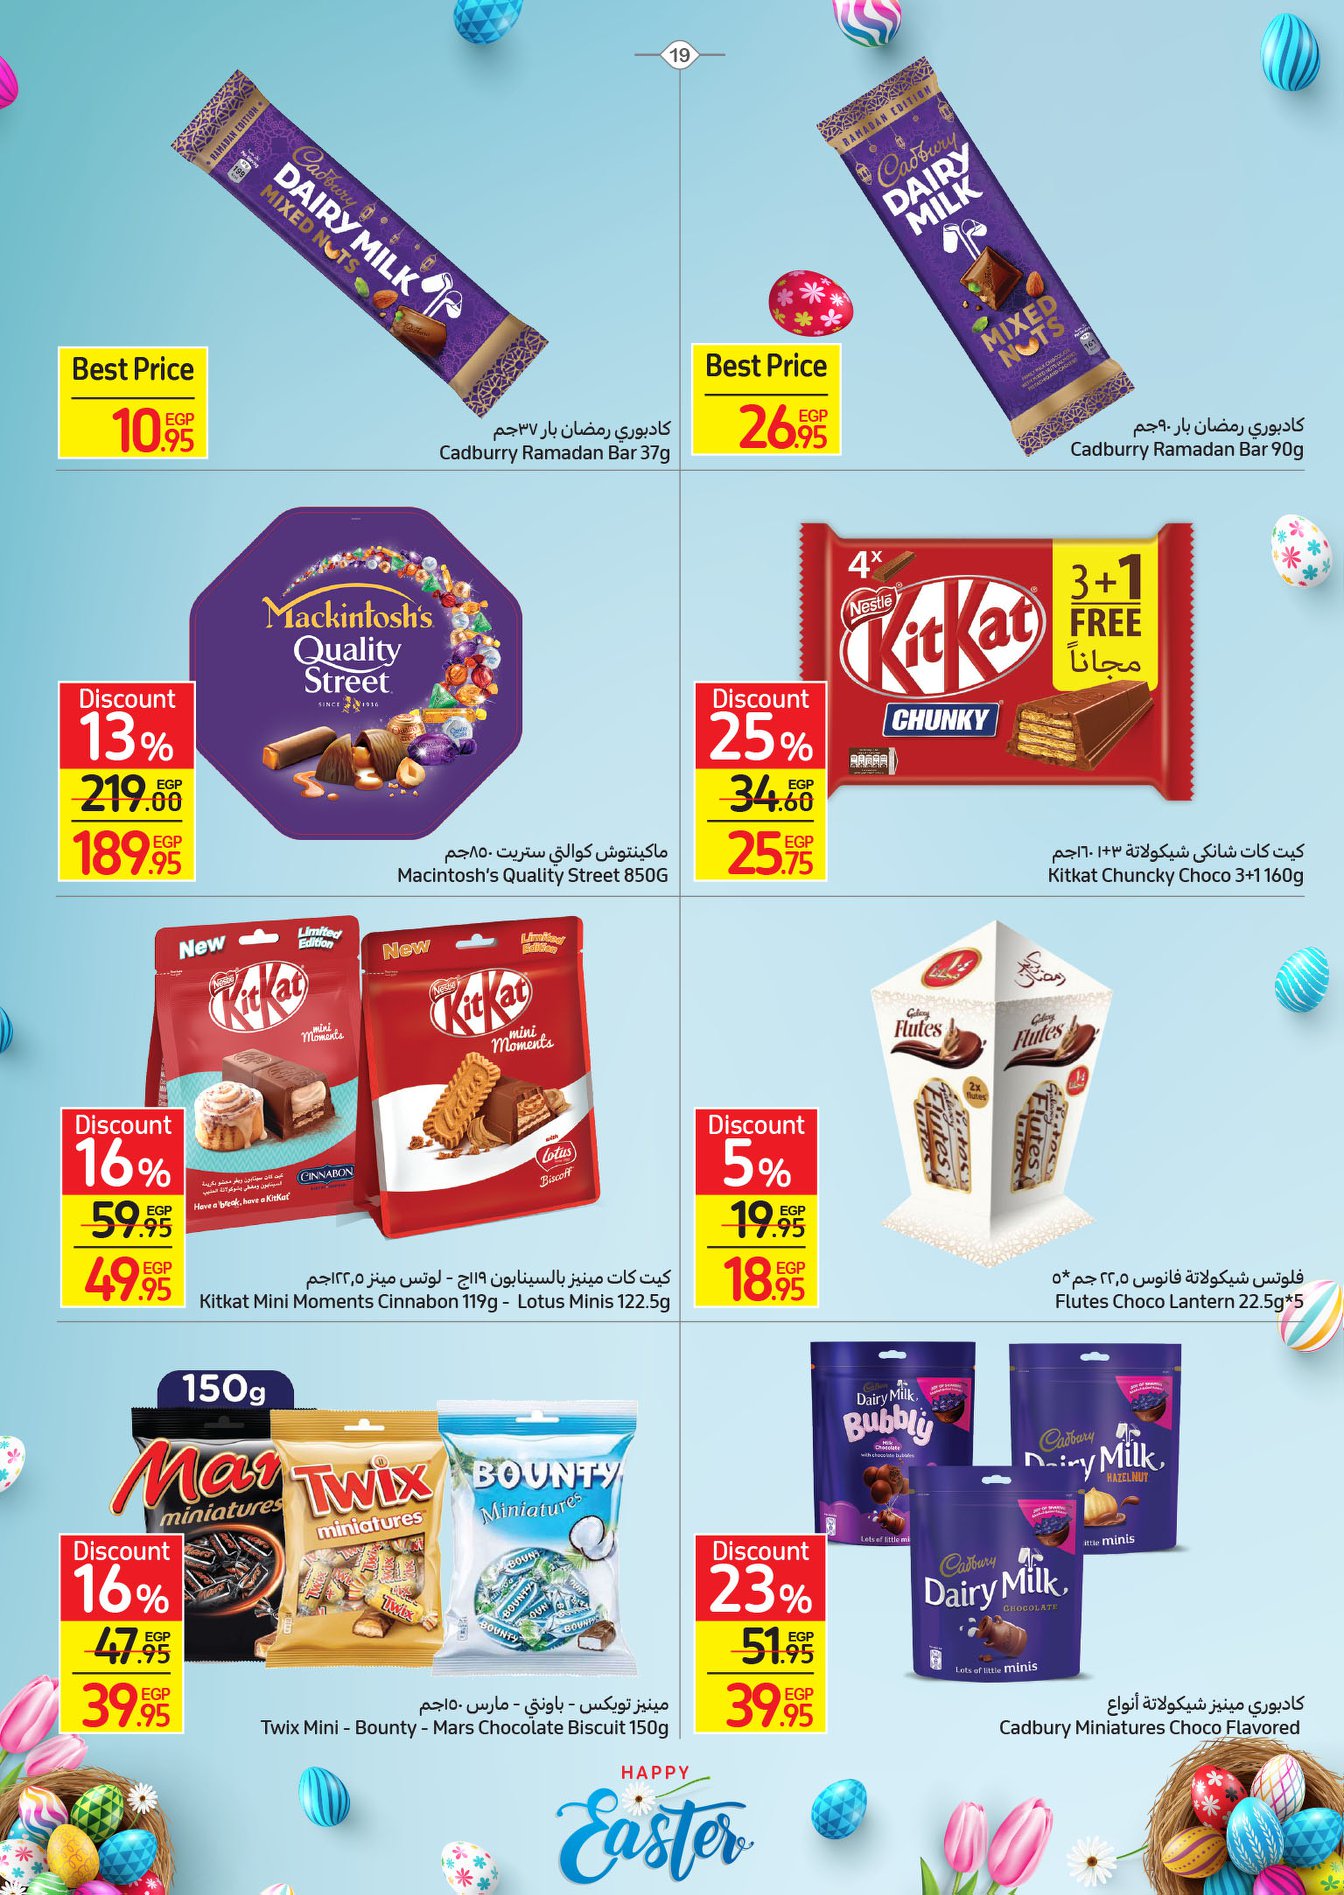 Enjoy now the strongest Carrefour offers from April 17-25, 2022.. Huge discounts on home essentials 6